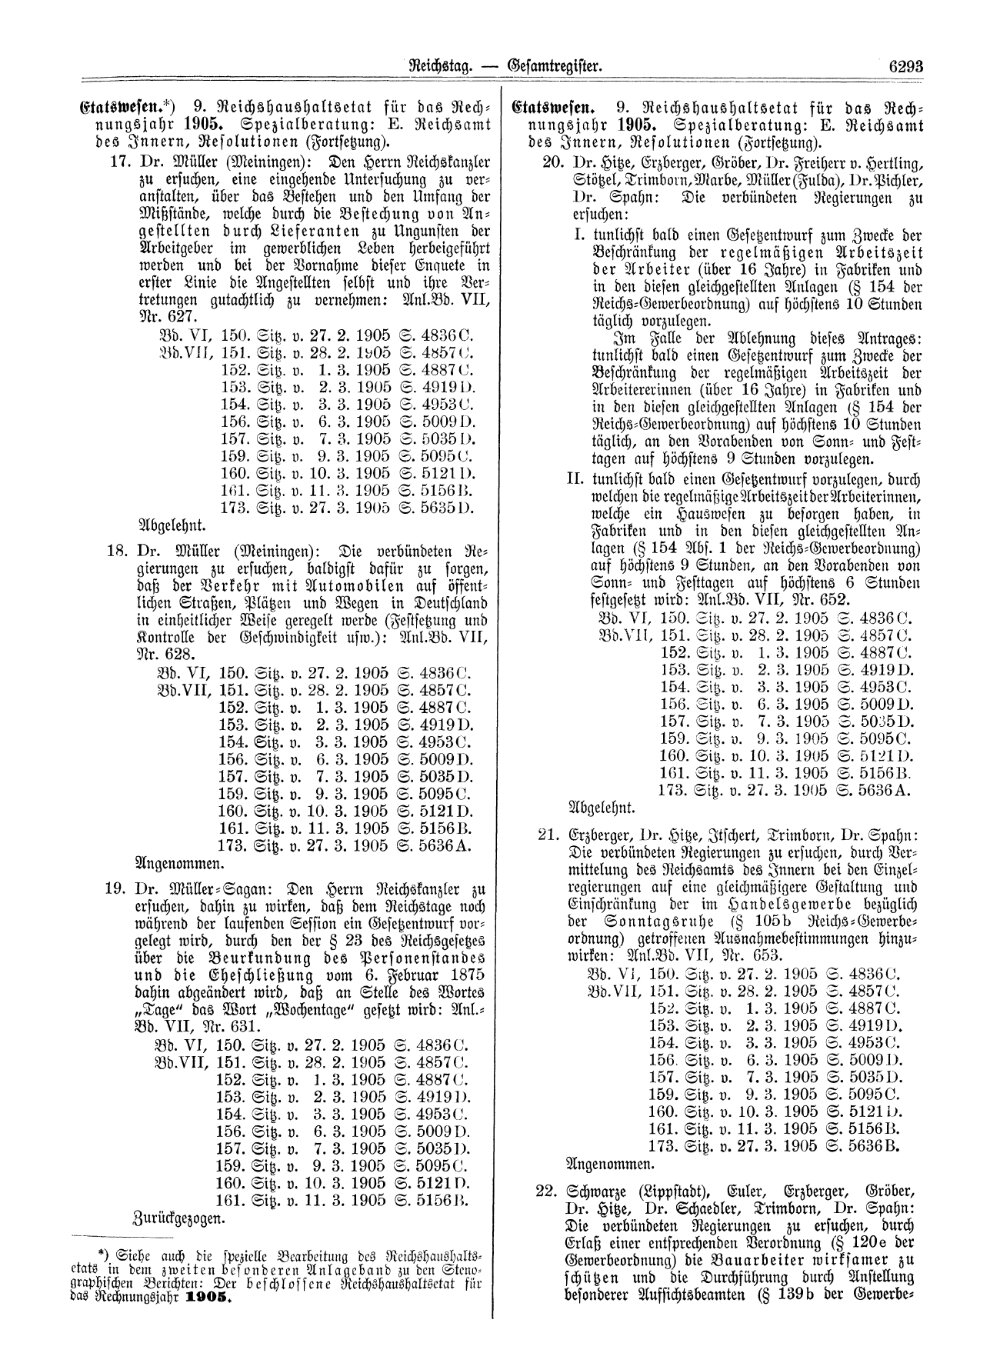 Scan of page 6293